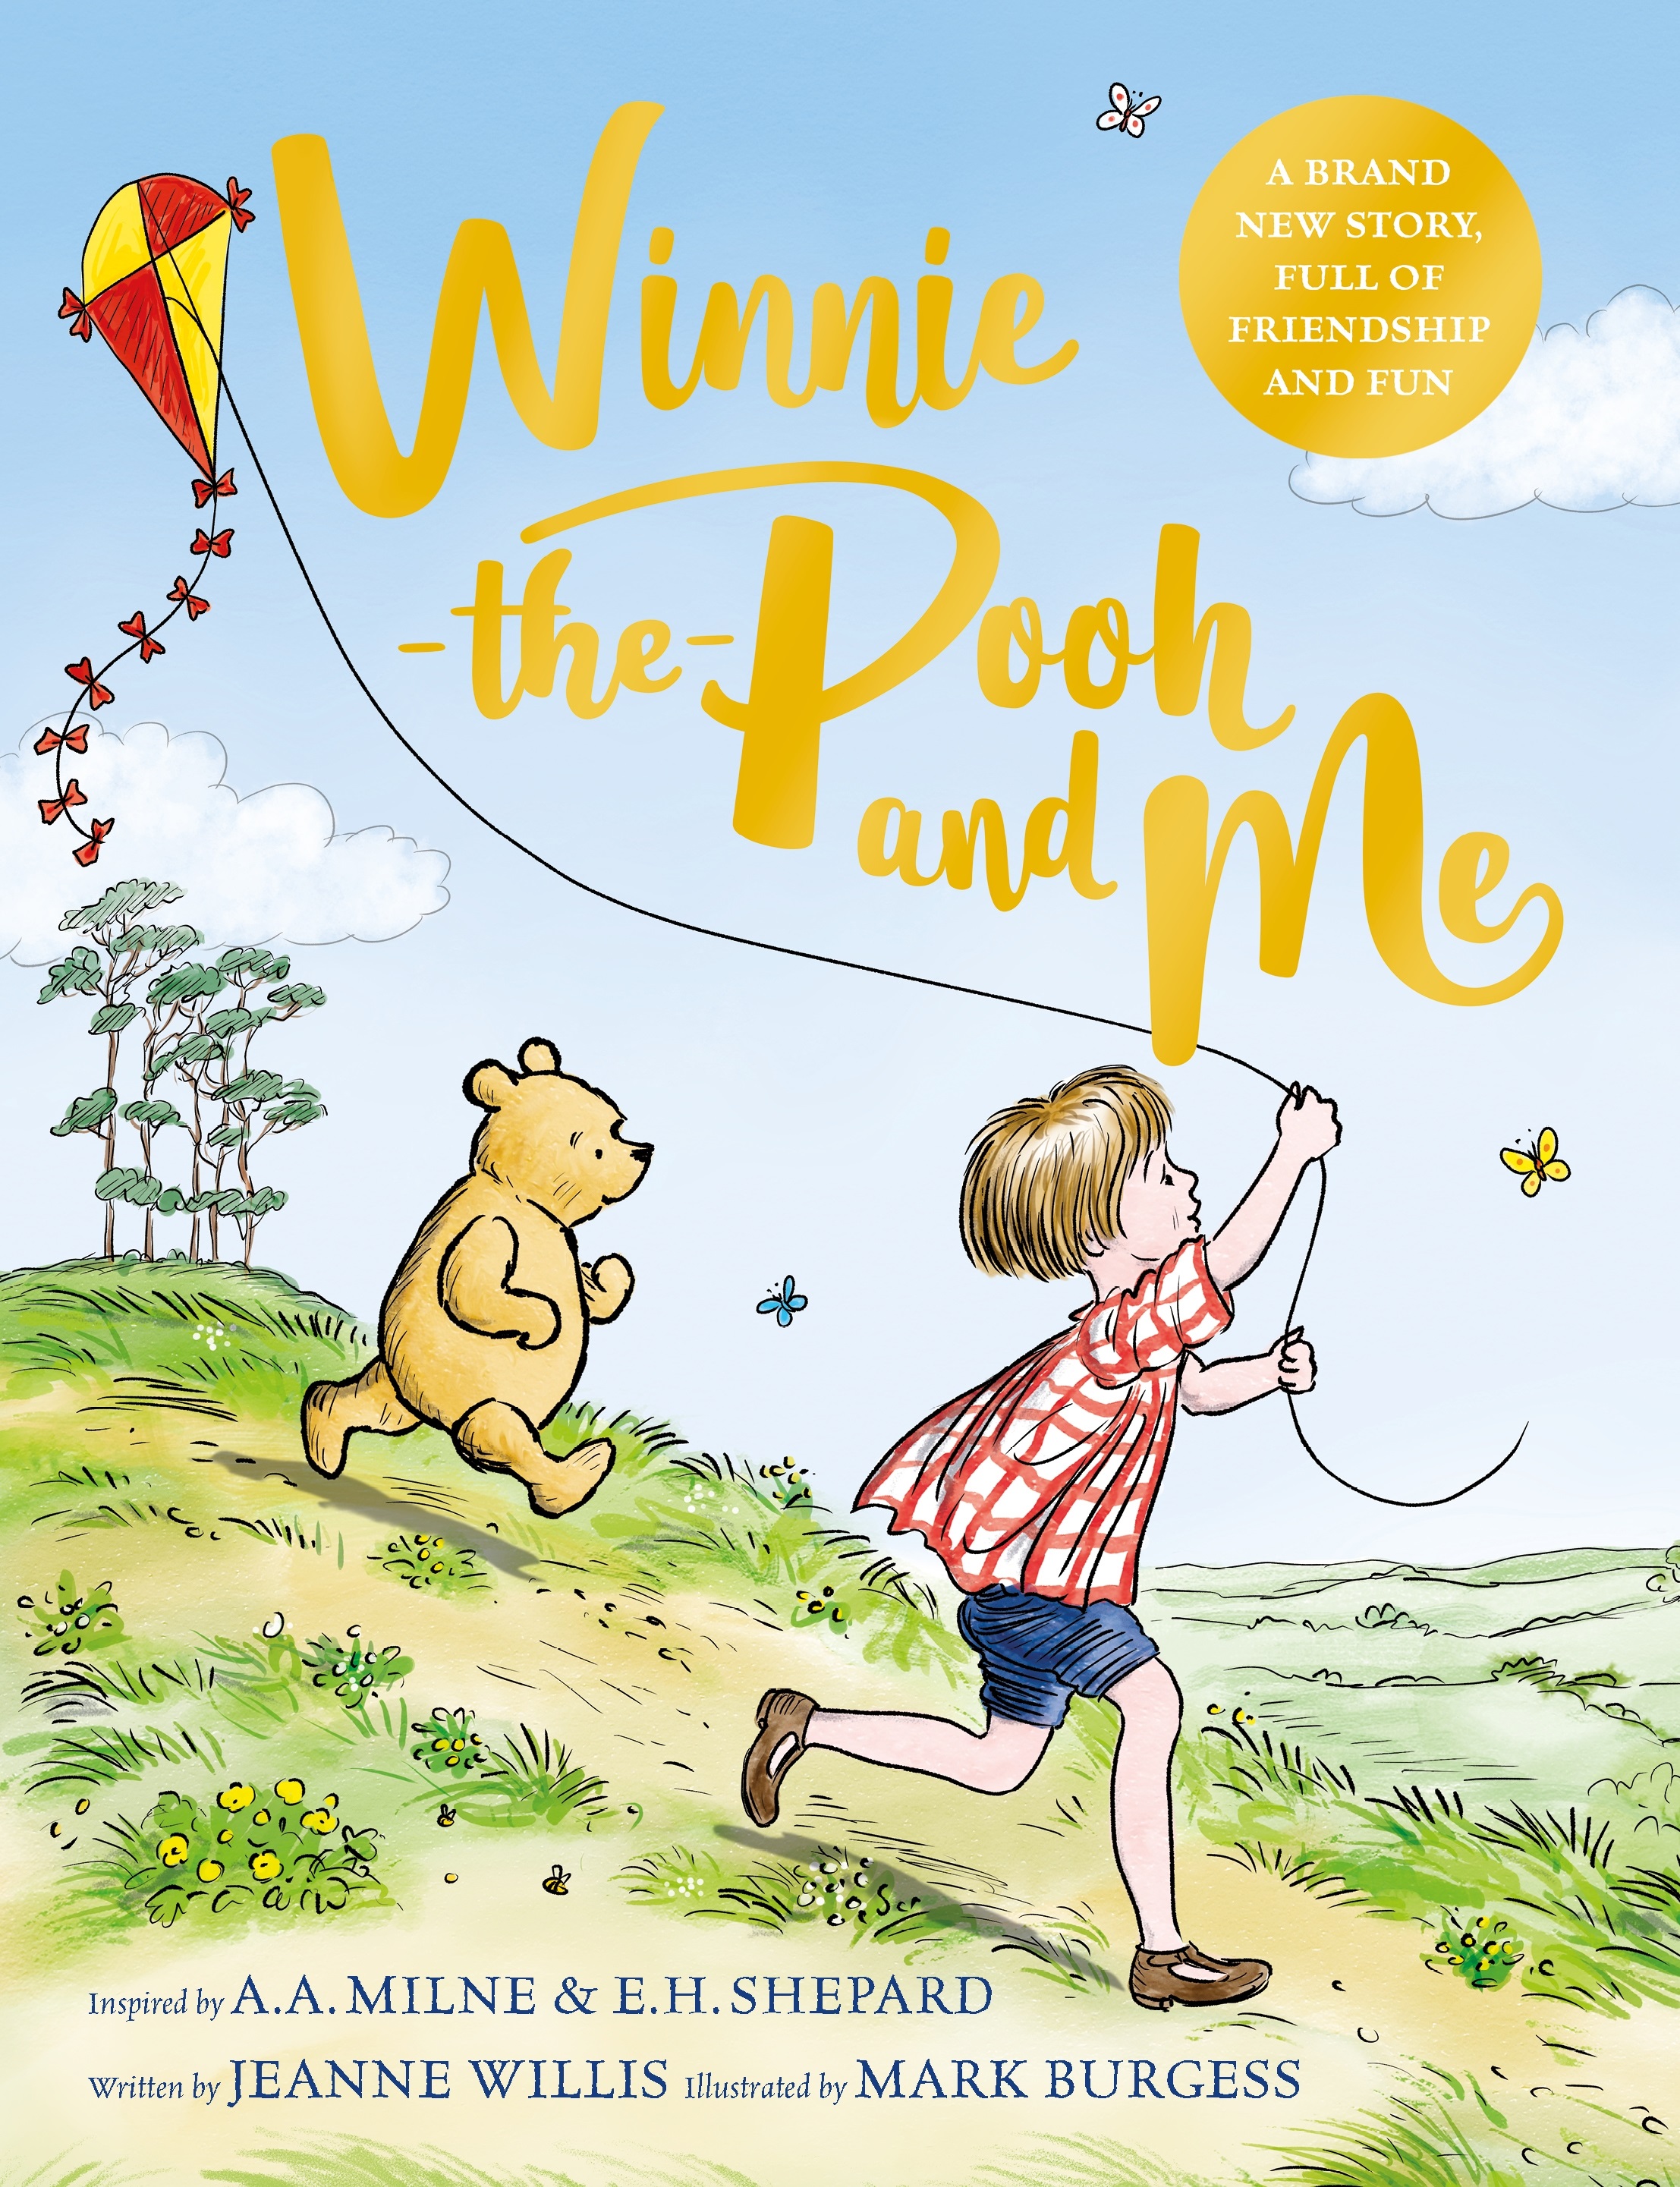 book review of winnie the pooh